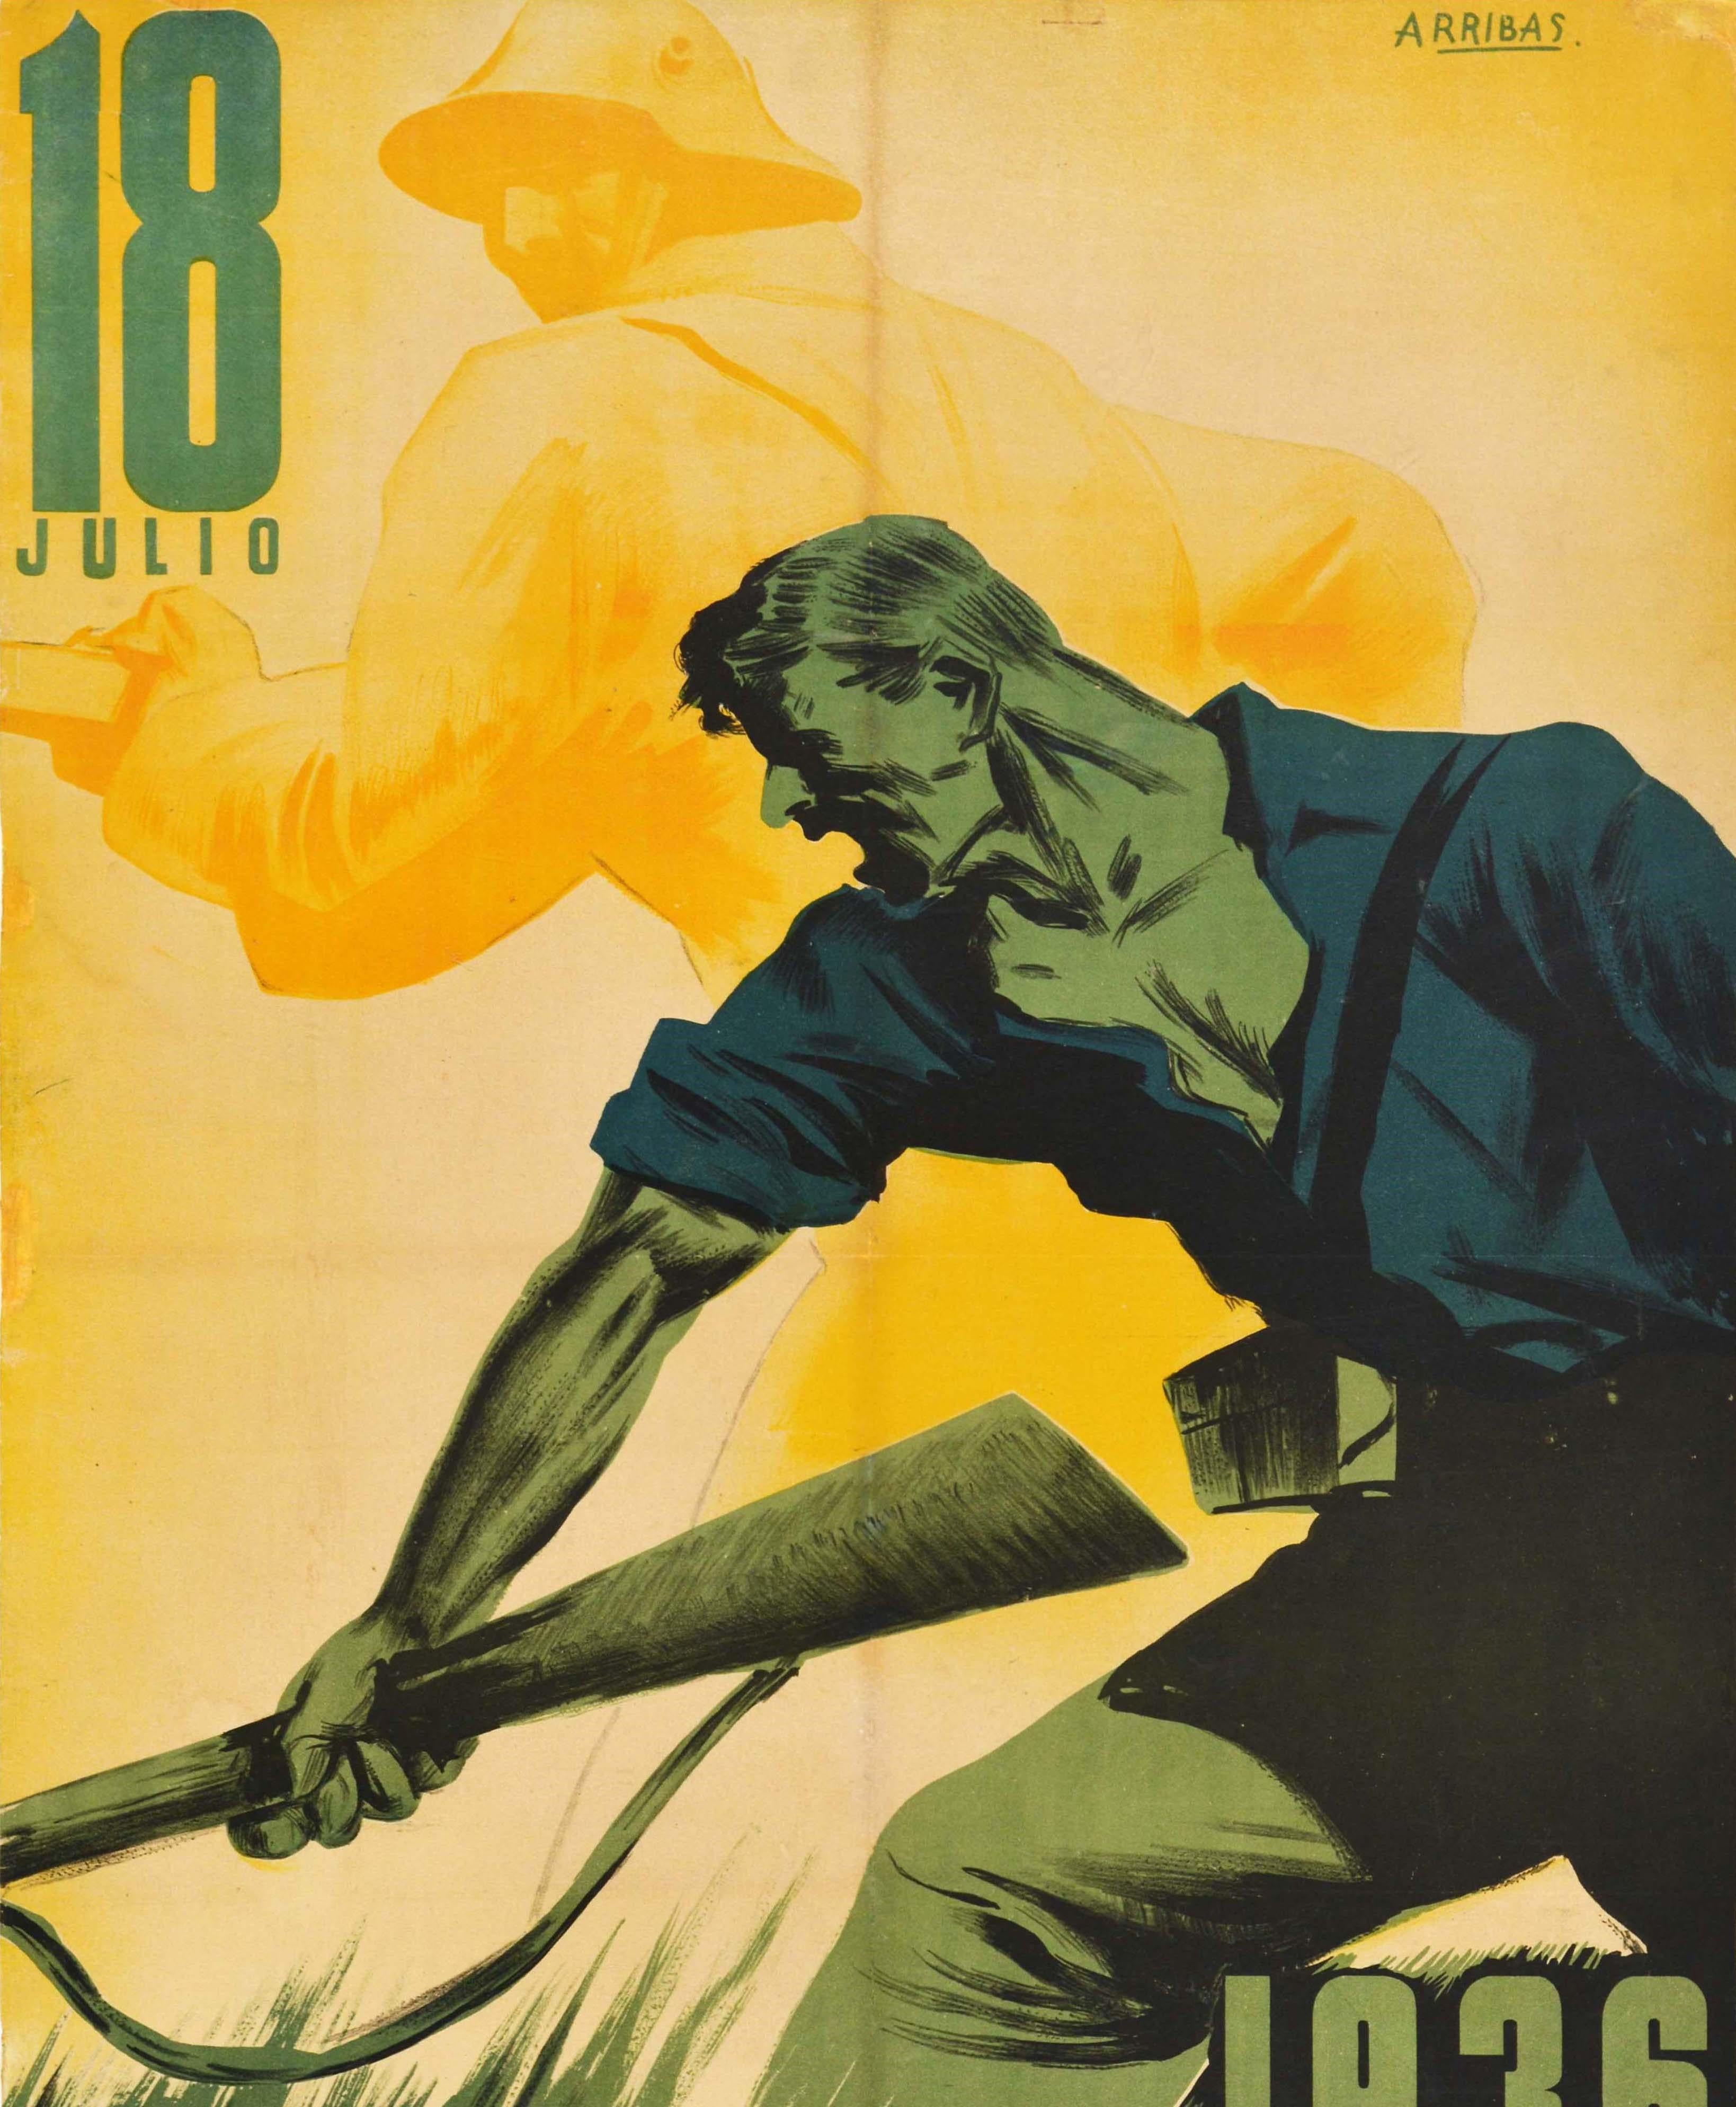 Original Vintage Spanish Civil War Poster July 18 Julio 1936 1937 Anniversary In Good Condition For Sale In London, GB